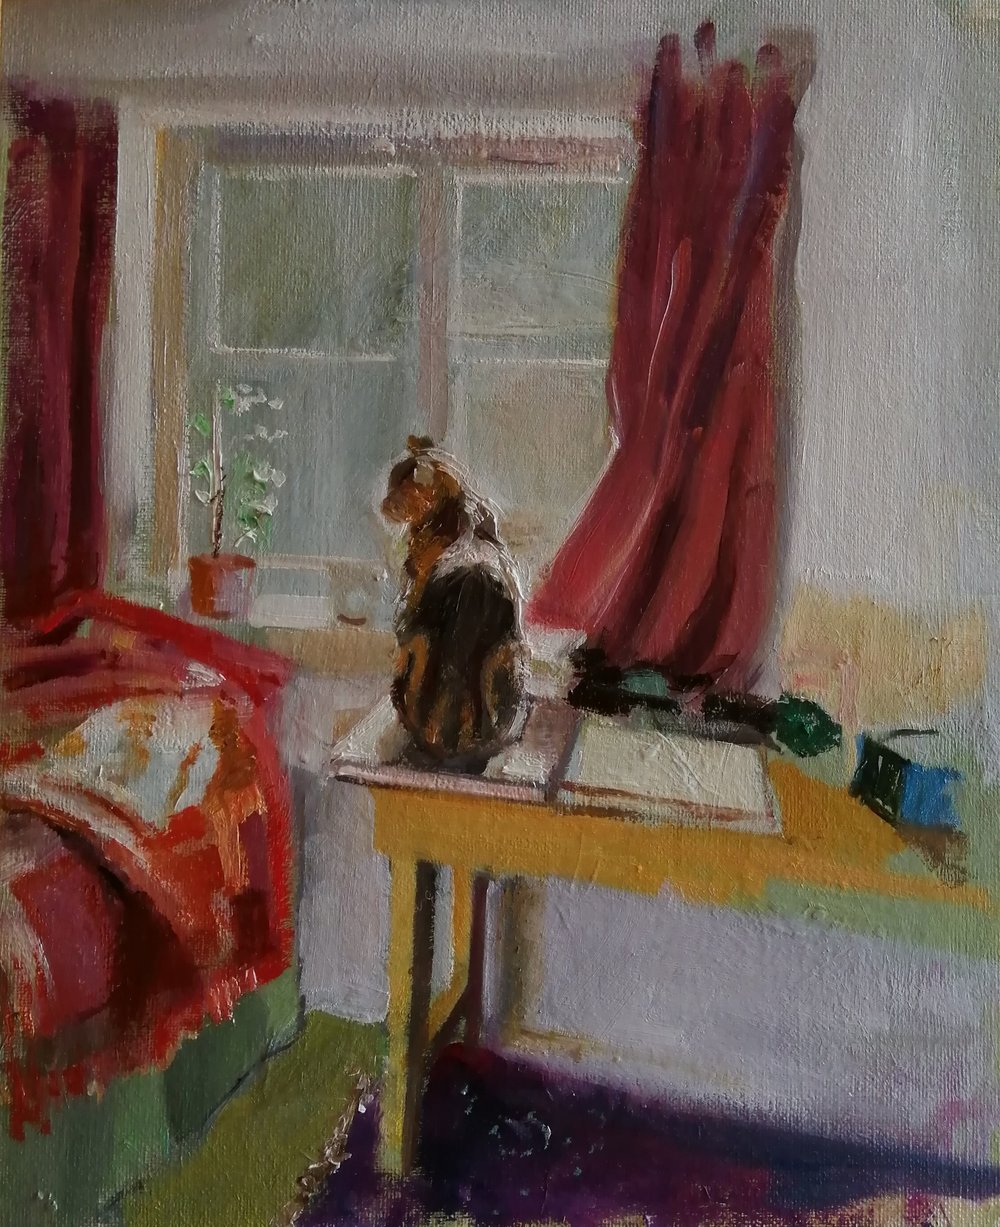  The spring sunshine  Oil on board  26x31cm  This modern impressionist painting celebrates the spring sunshine pouring through a window across a table on which the artist's cat sits. An everyday scene is captured and bathed in light. 